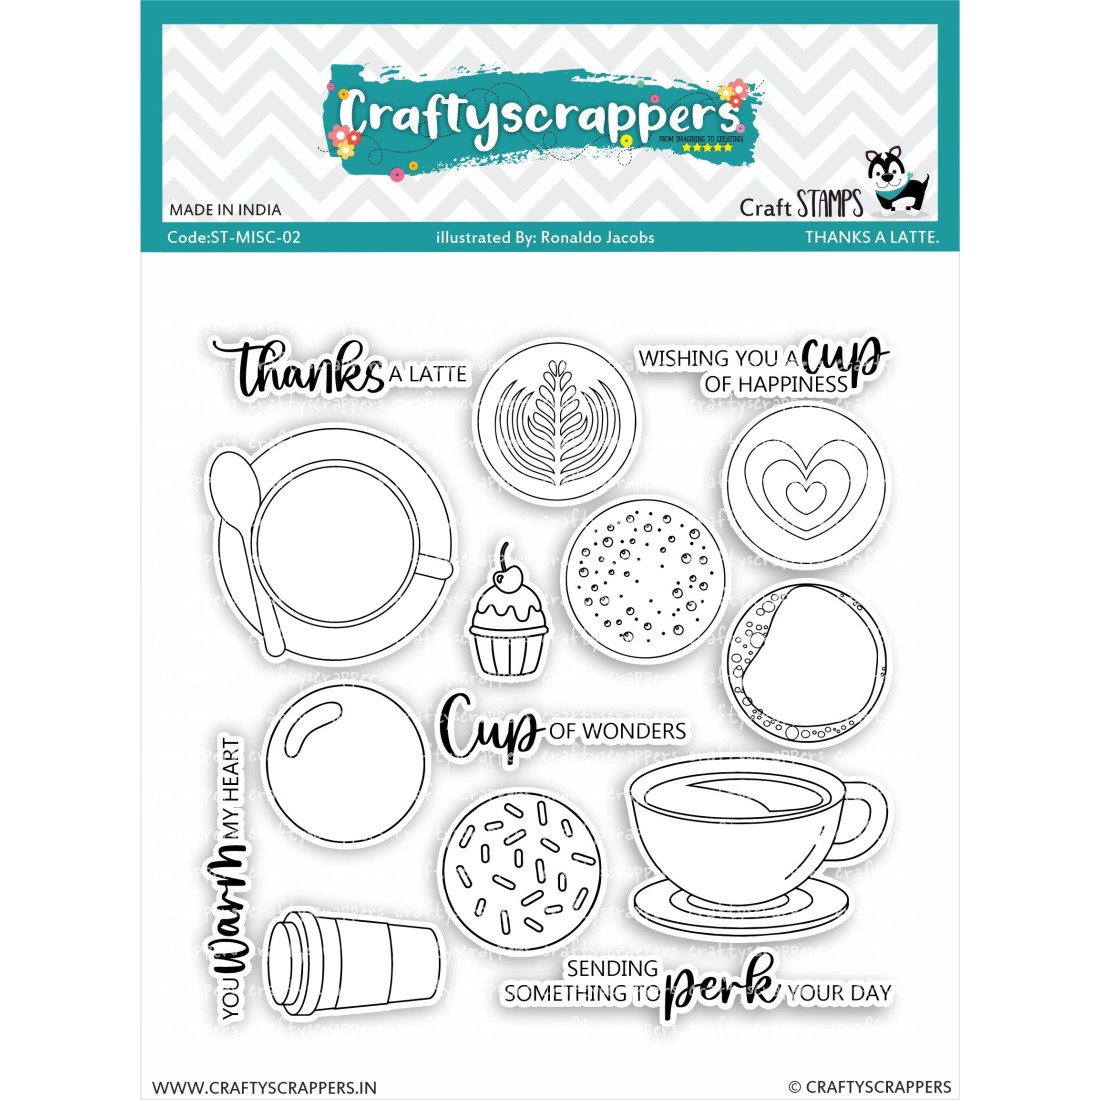 Craftyscrappers Stamps- THANKS A LATTE